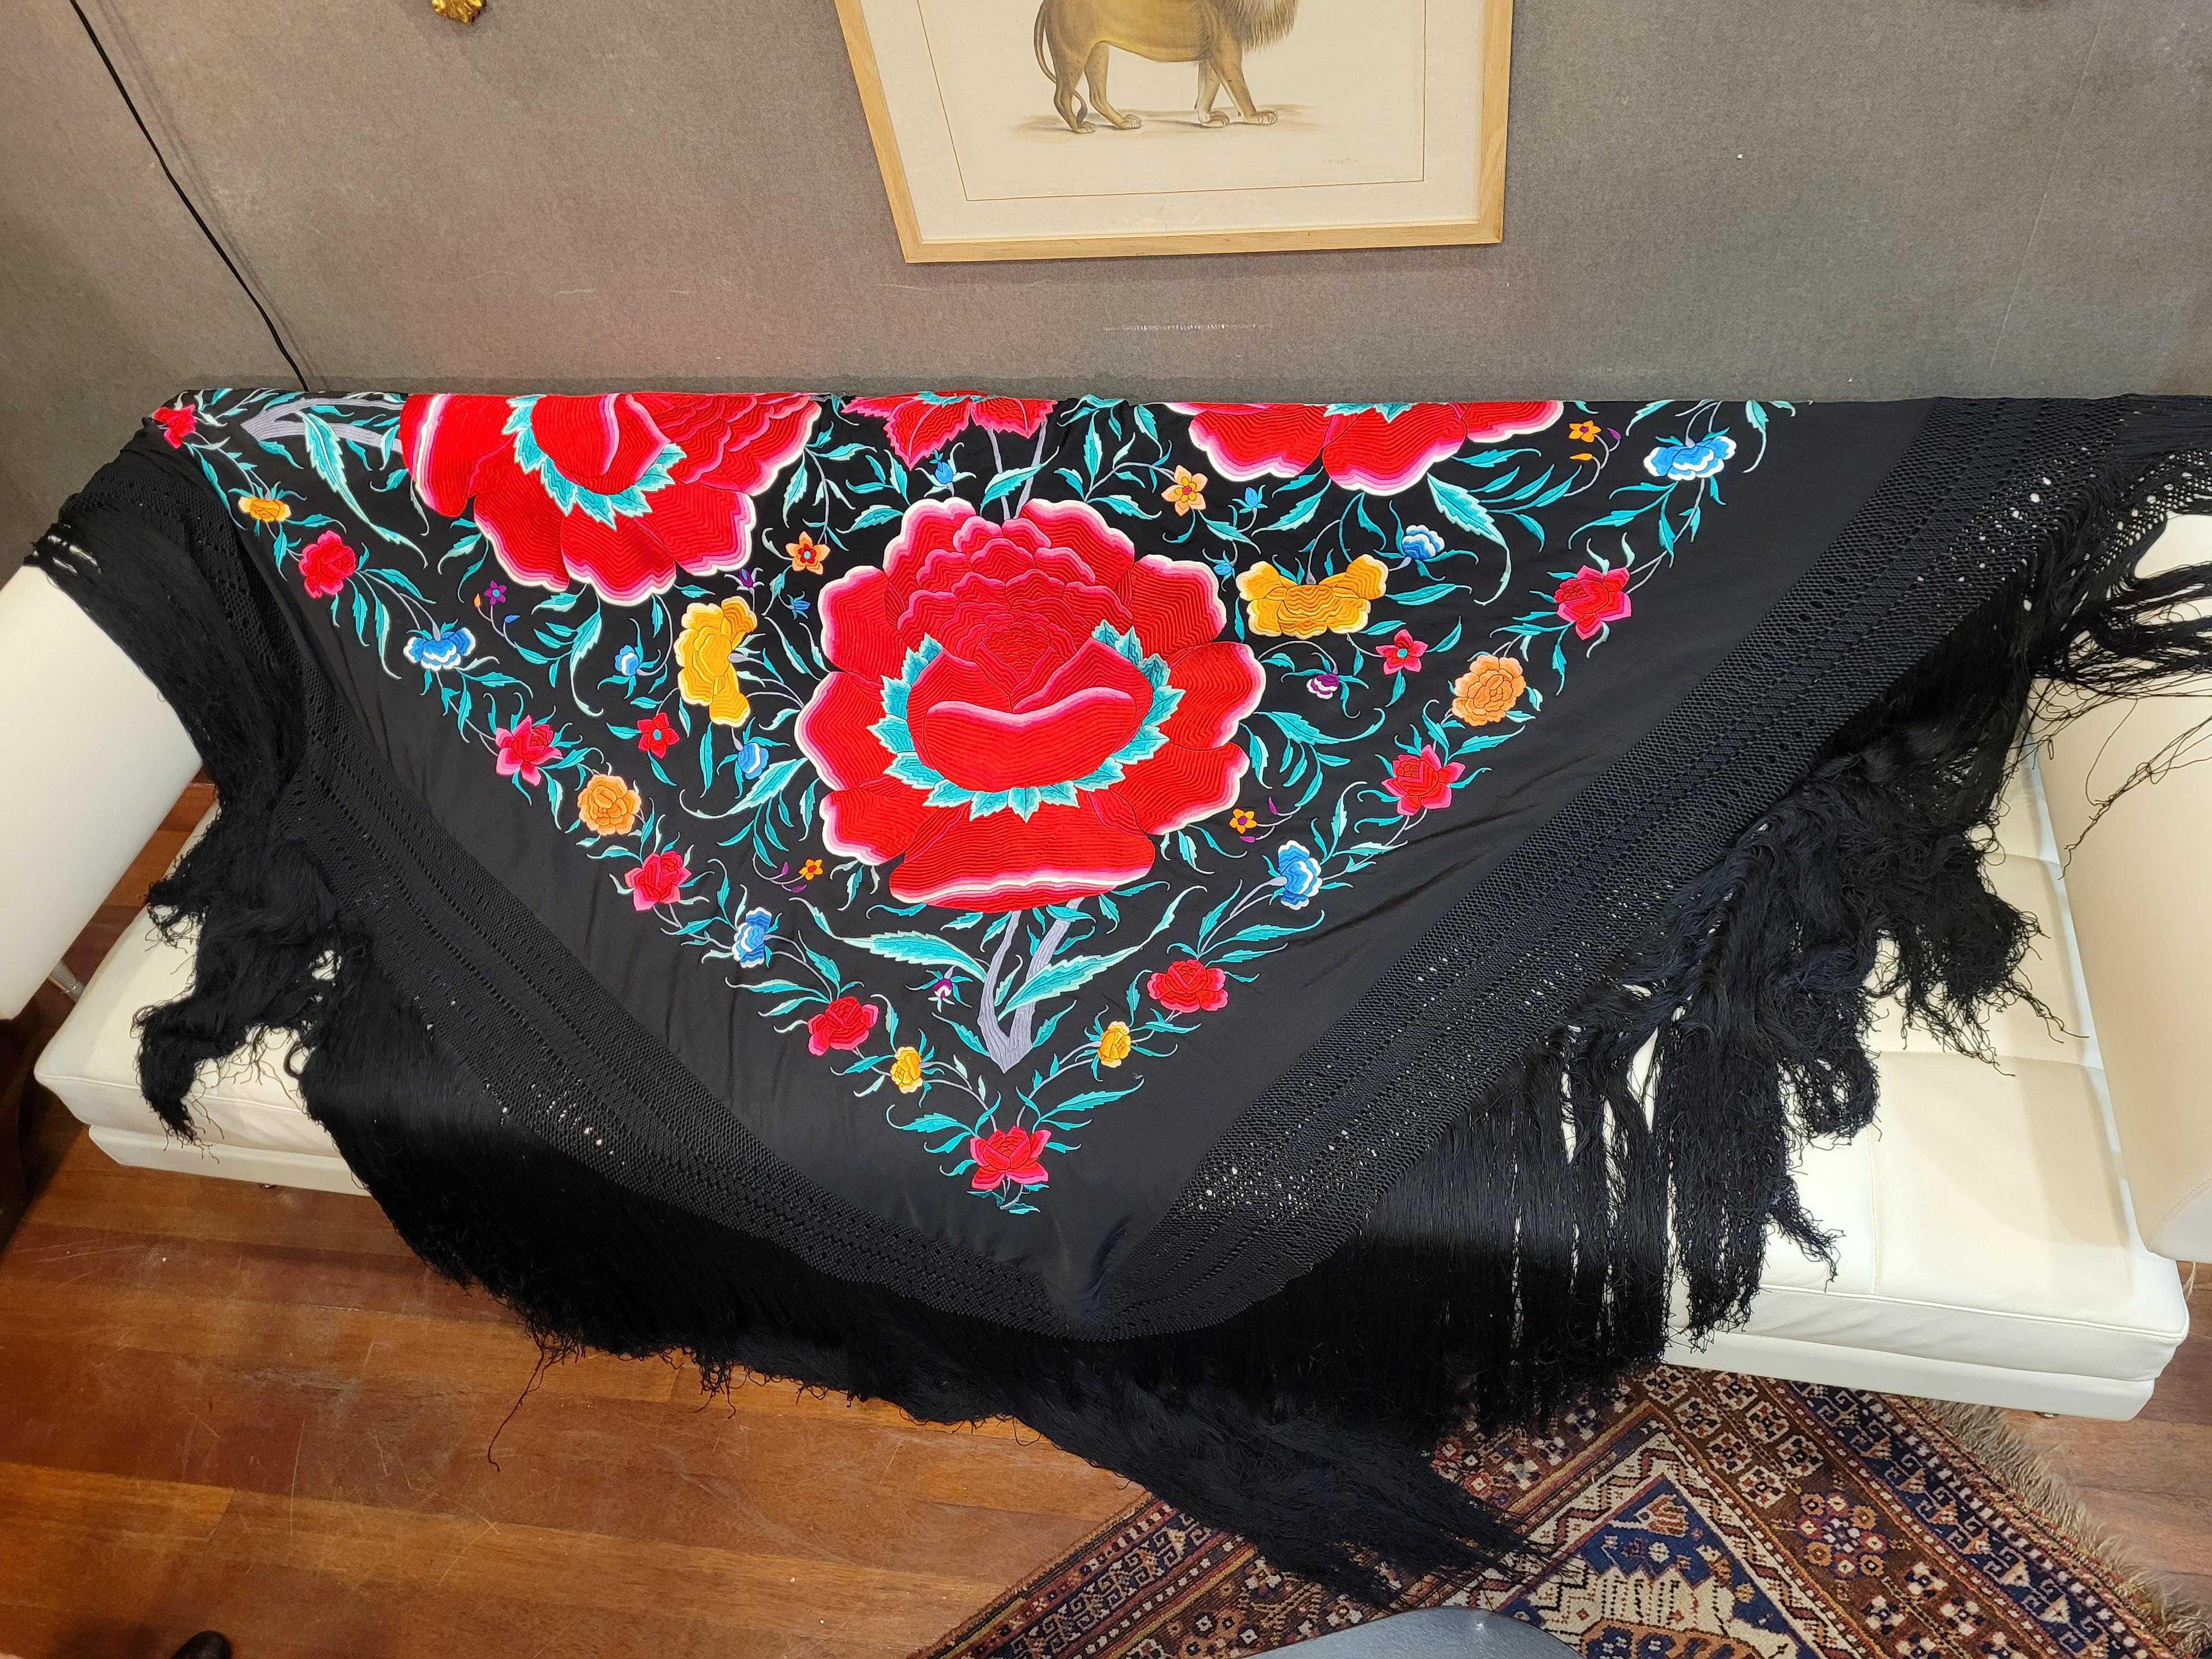 Outstanding antique Manila shawl made of black silk with embroidery in a wide variety of colors. As is usual in this type of piece, the base fabric is silk and the threads with which the ornaments are embroidered are also silk.

The technique used